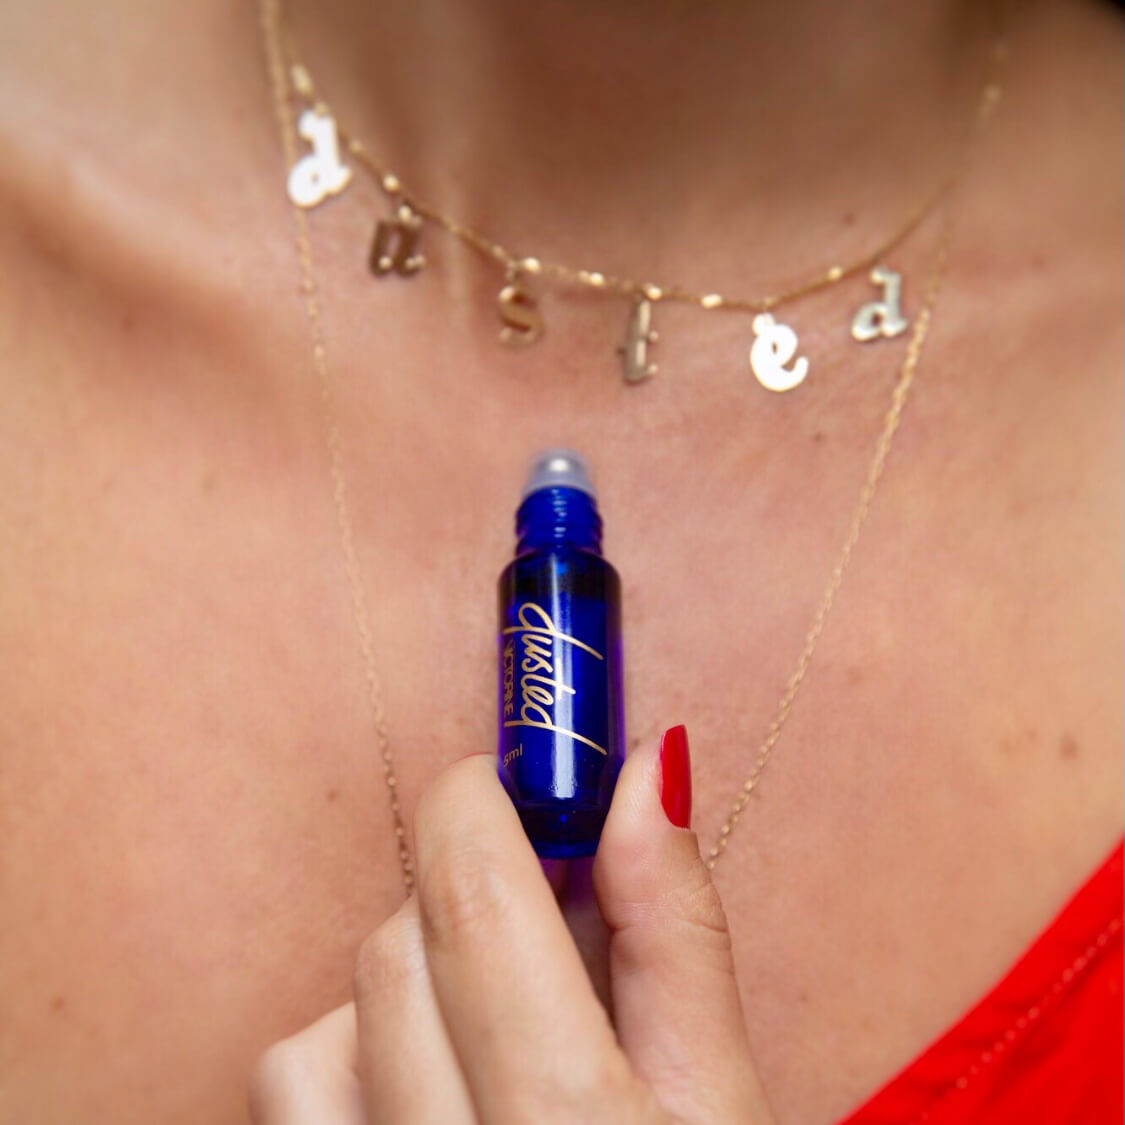 Dusted fragrance in a blue glass bottle with gold letters, held by a hand with red nails, over the décolleté of a white person wearing two gold necklaces, one reads "dusted" in gold charms. 